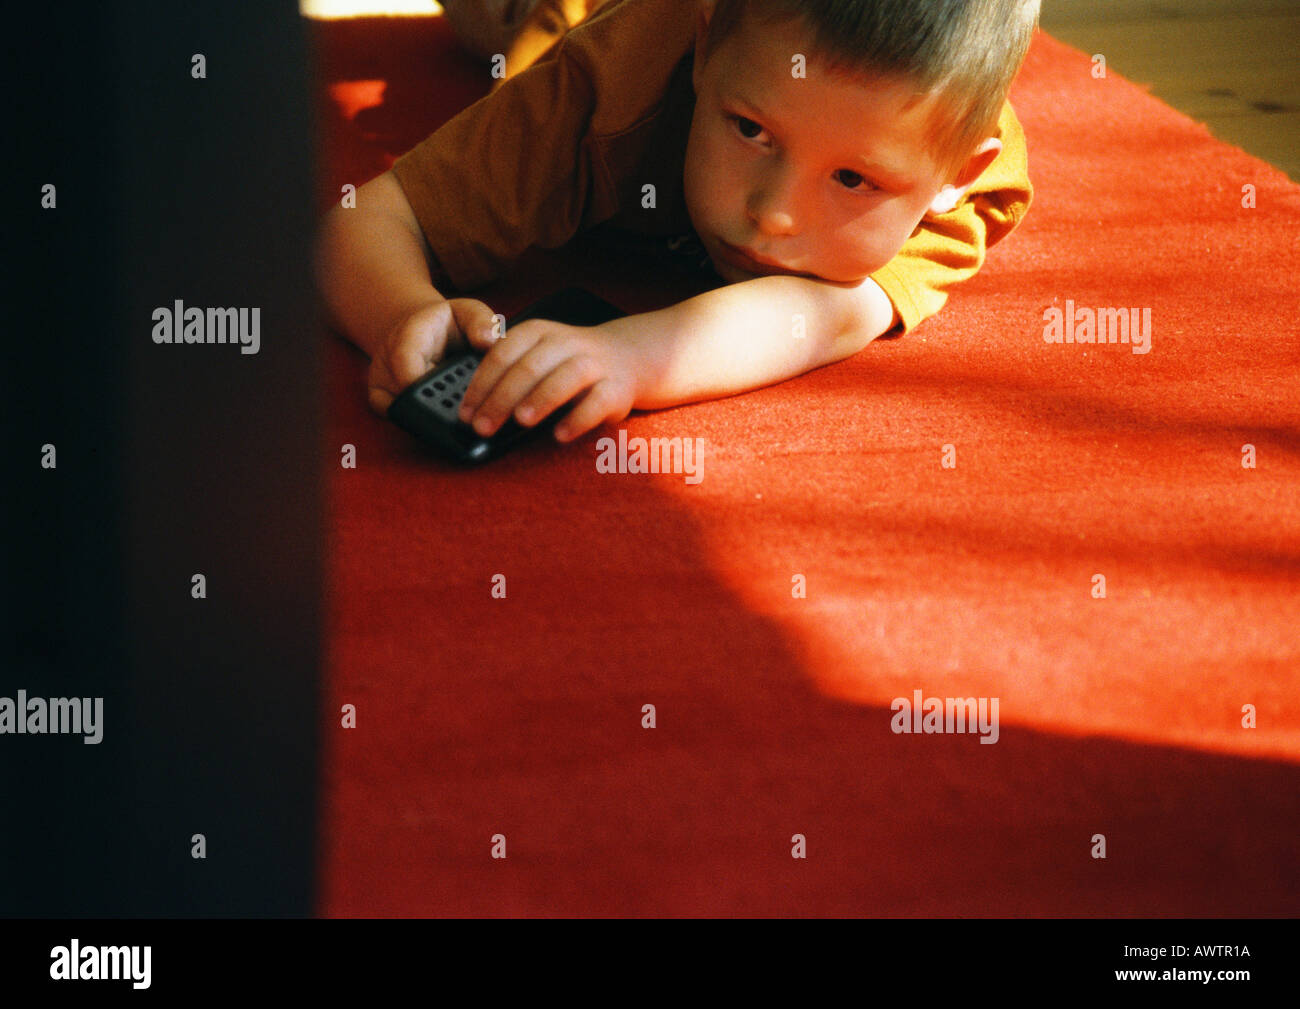 Little boy lying on floor, holding remote control Stock Photo